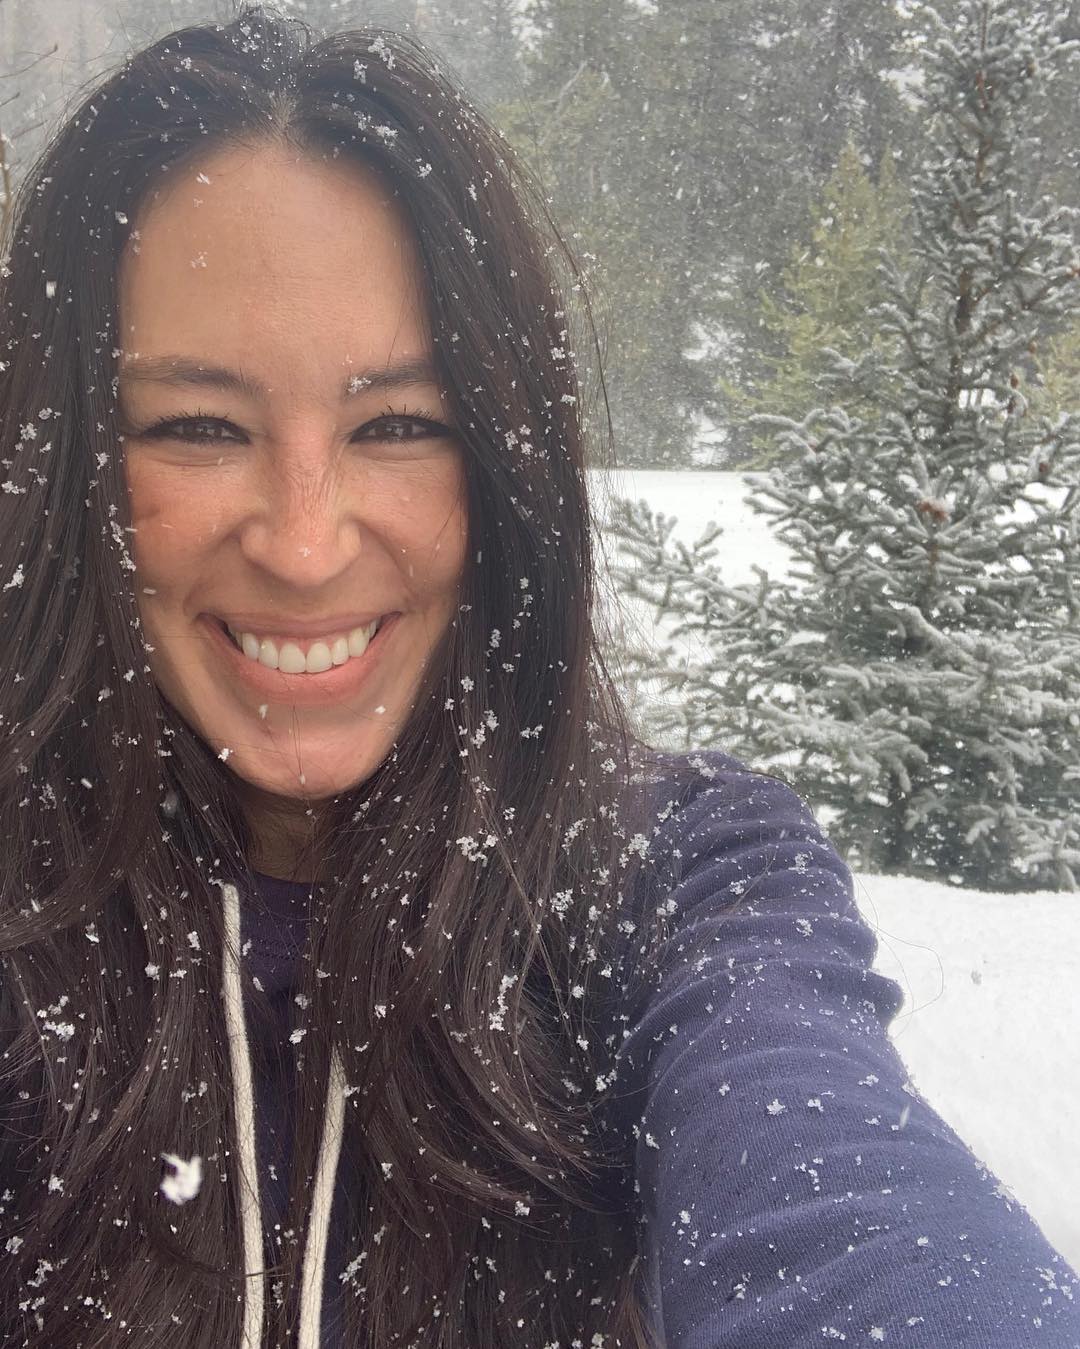 Joanna Gaines New Snow Angel Pic of Baby Crew Will Melt Your Heart